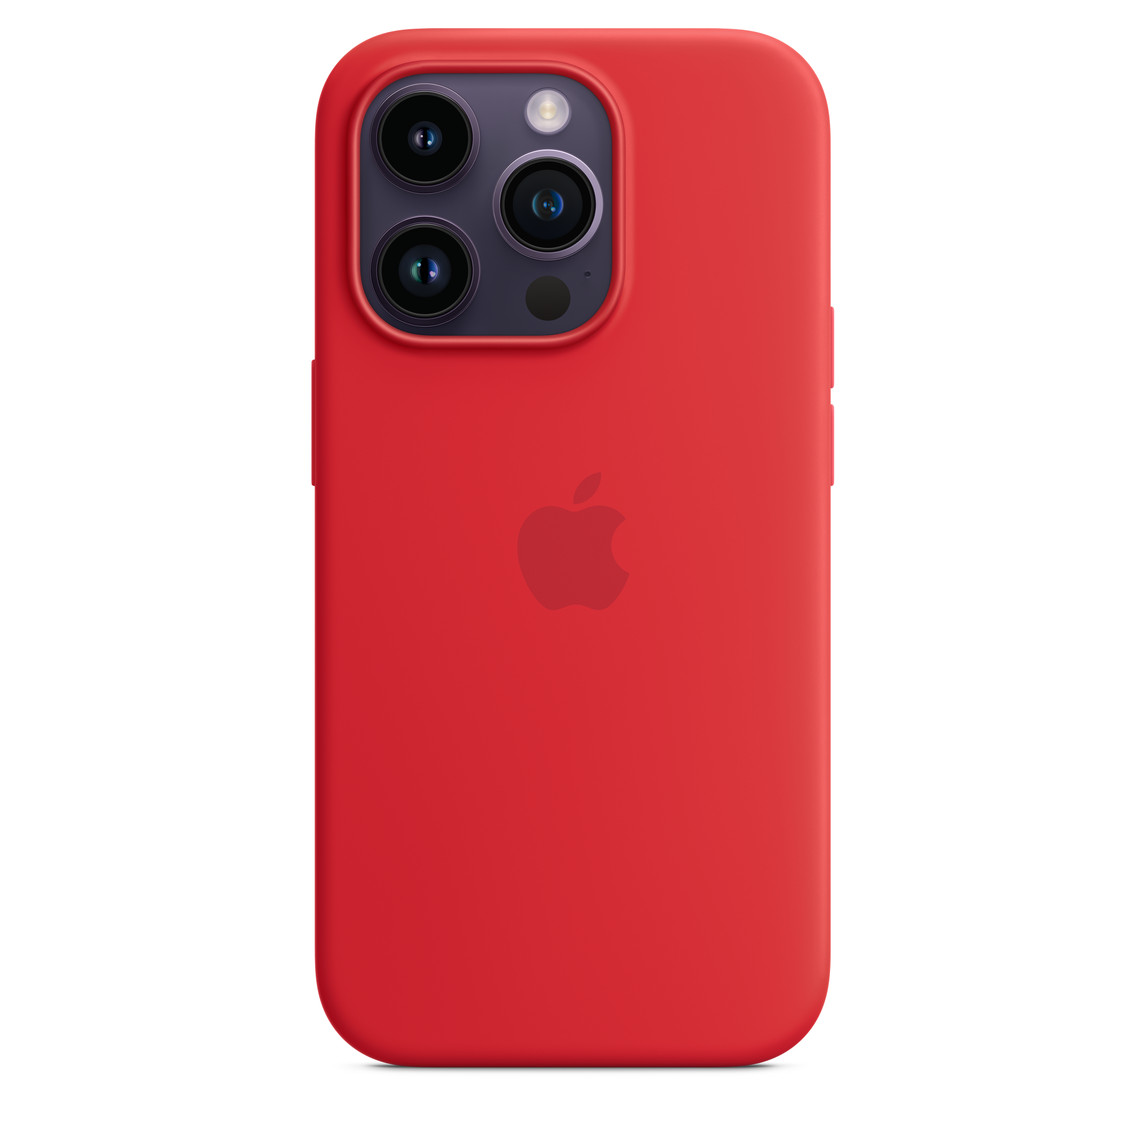 (PRODUCT)RED iPhone 14 Pro MagSafe 矽膠保護殼，搭配深紫色 iPhone 14 Pro